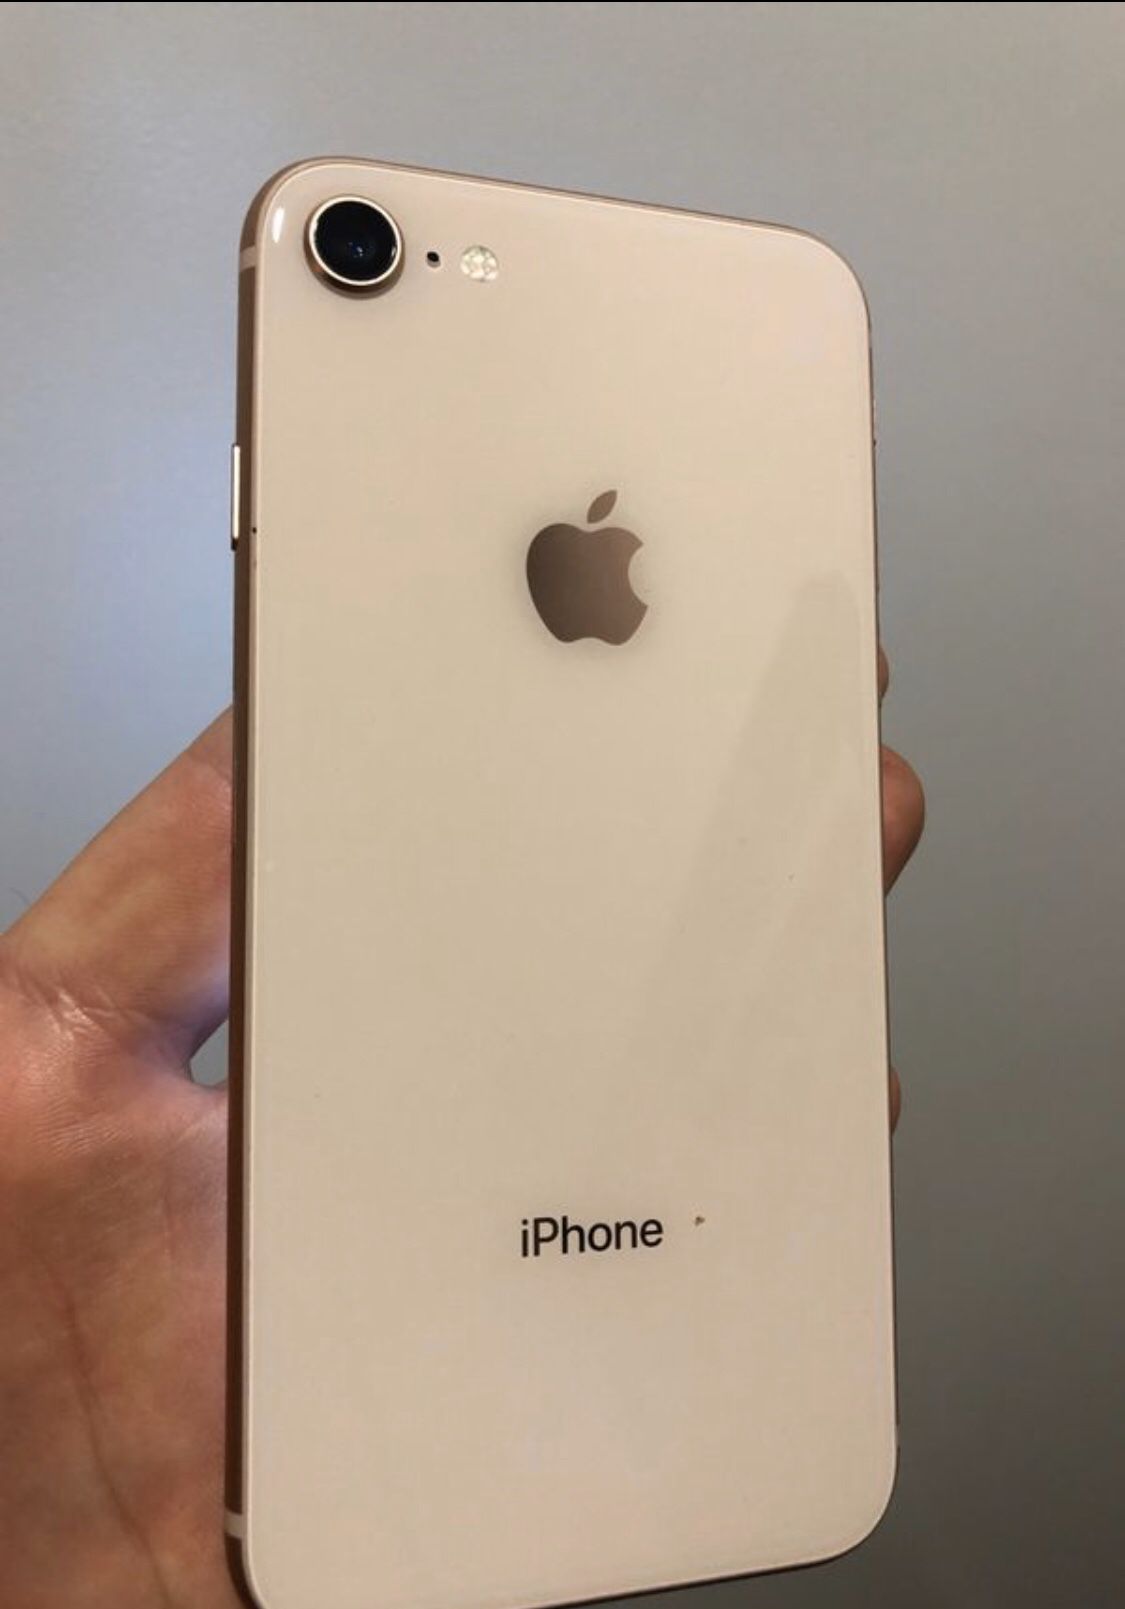 iPhone 8 regular size 64gb use all carriers paid full price and apple care for it November 2019